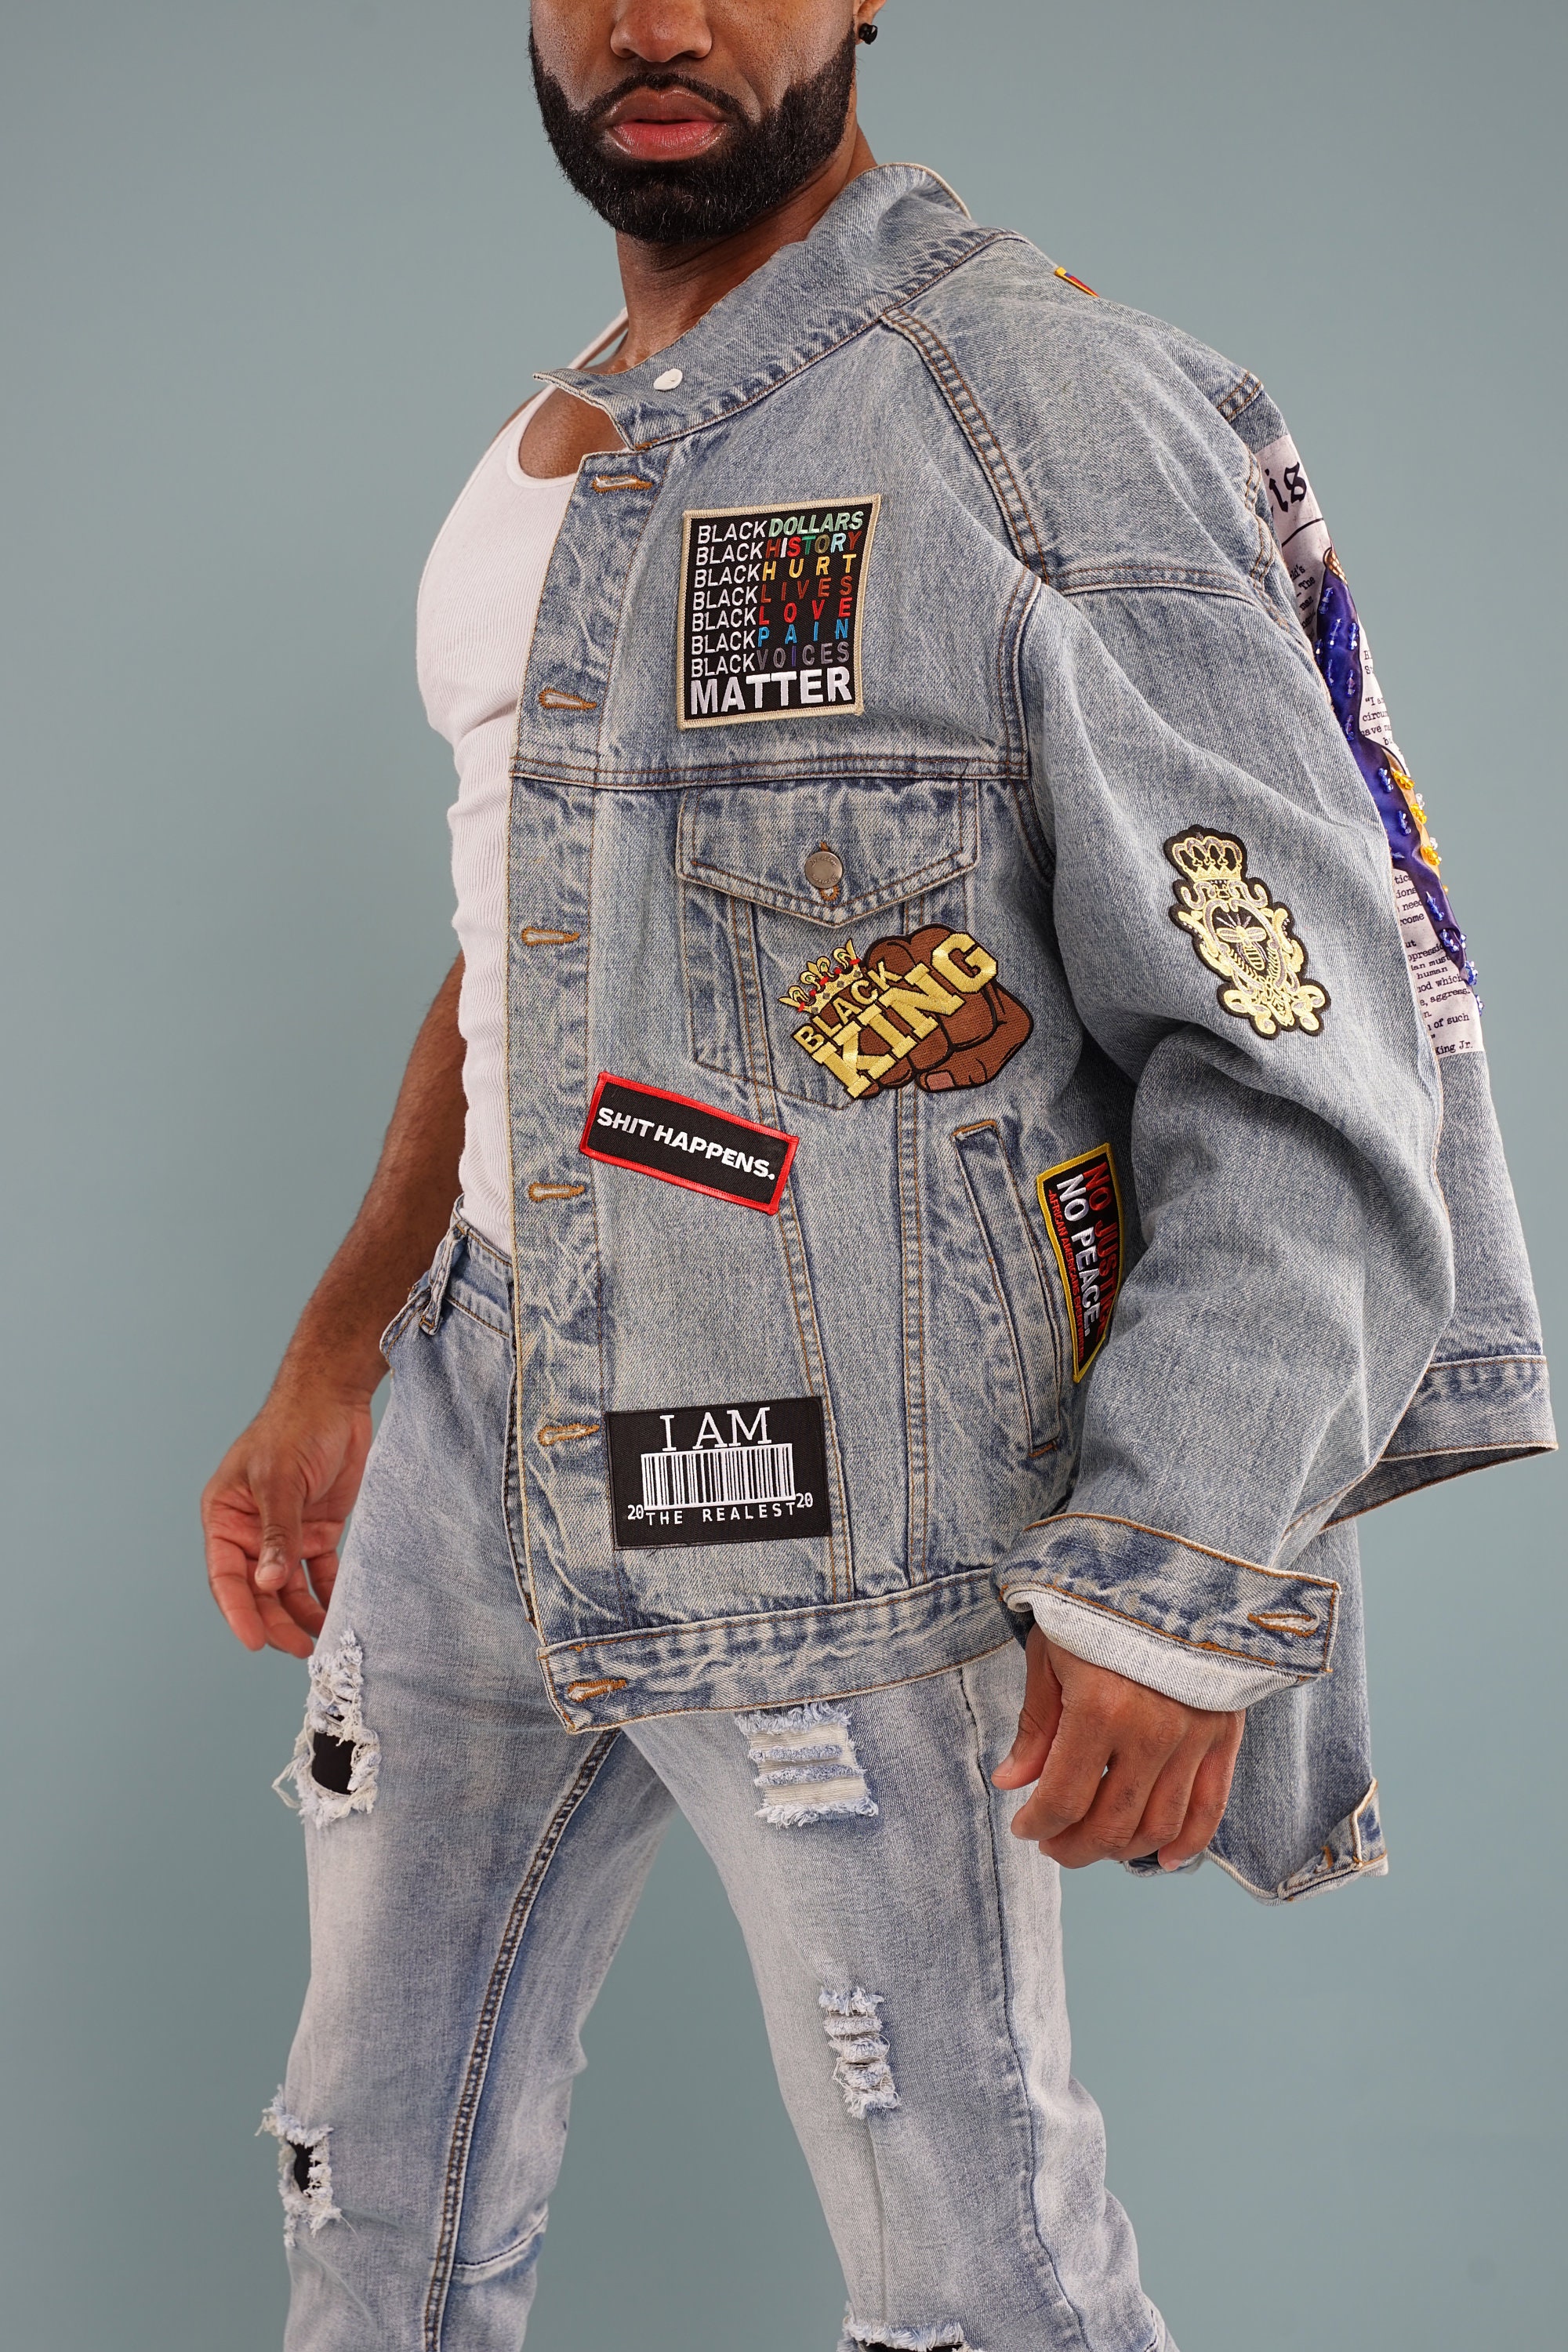 21 Cool Denim Jacket Patches glamhere.com